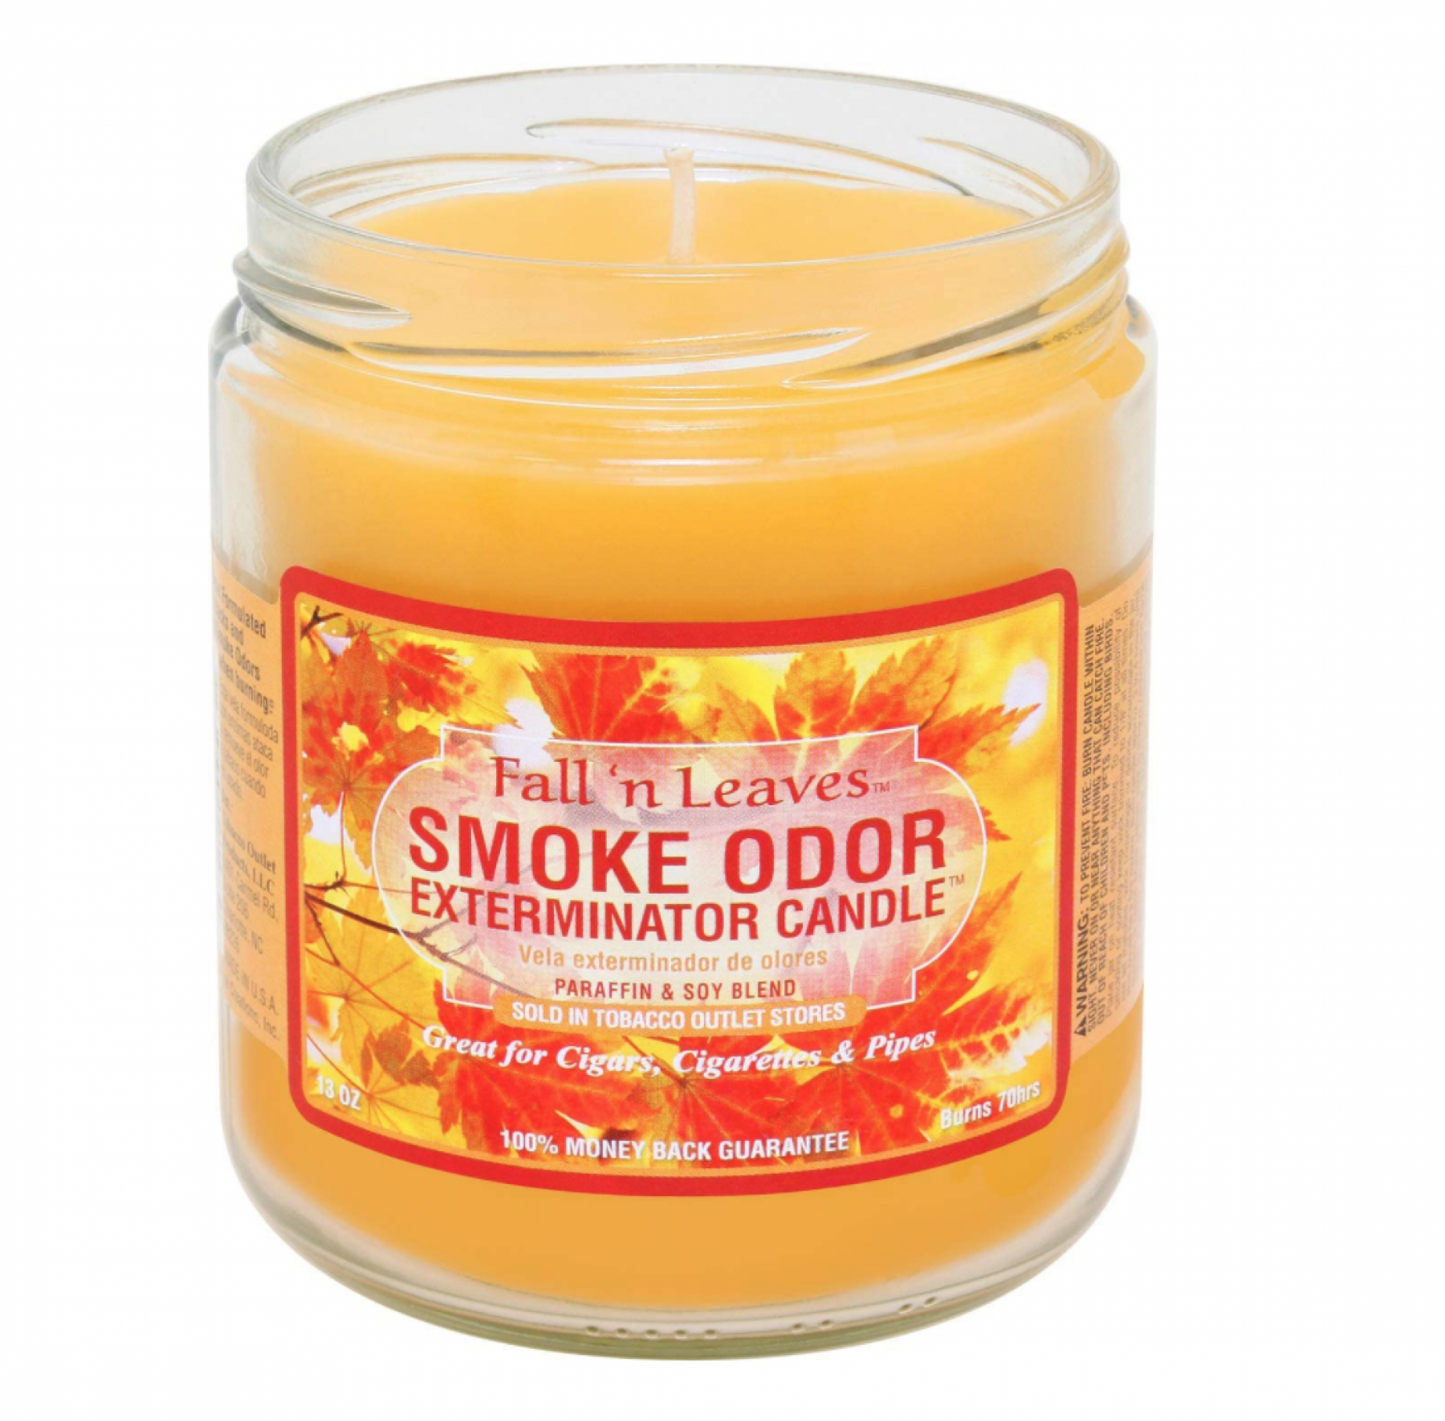 Candle in Jar with Orange Wax and Smoke Odor Label